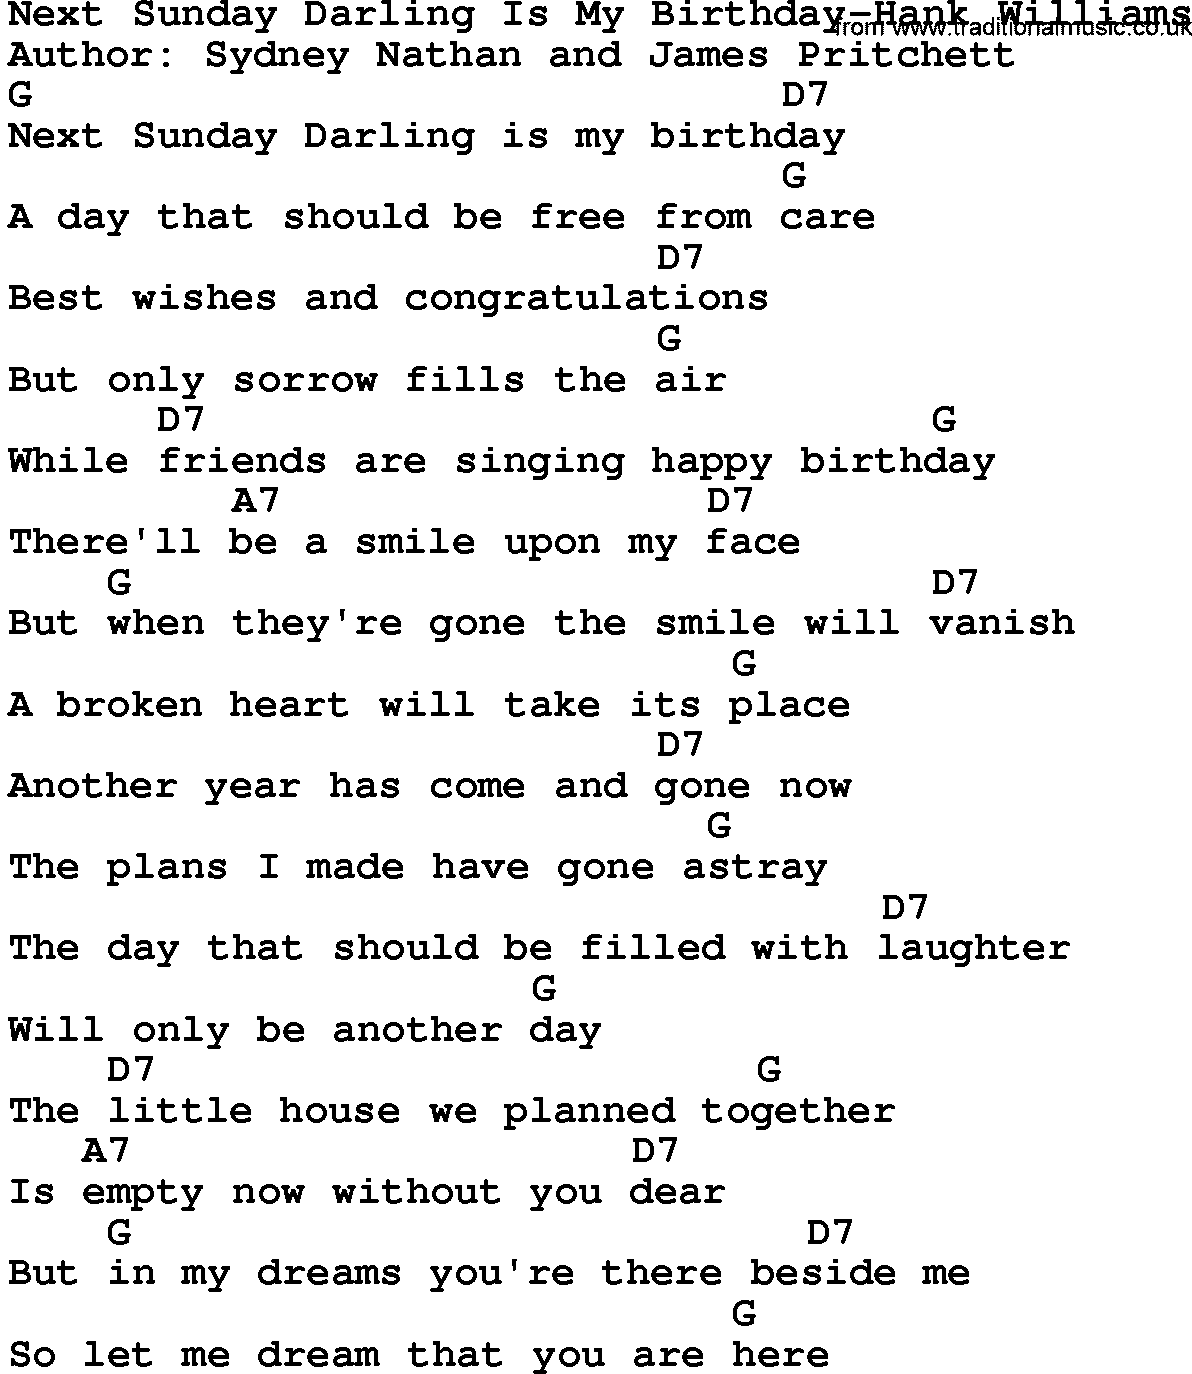 Country music song: Next Sunday Darling Is My Birthday-Hank Williams lyrics and chords